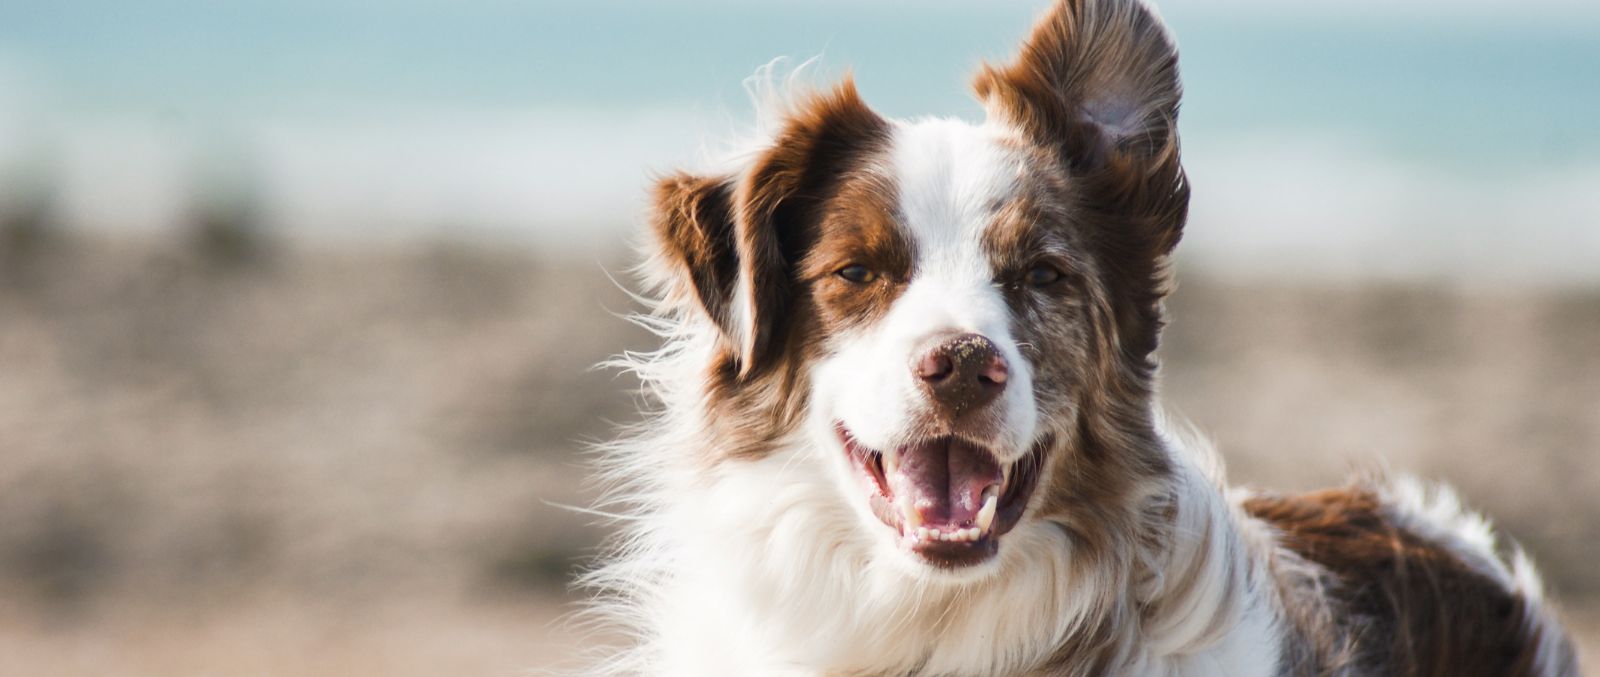 5 Ways to Take Care of Your Dog's Skin and Coat